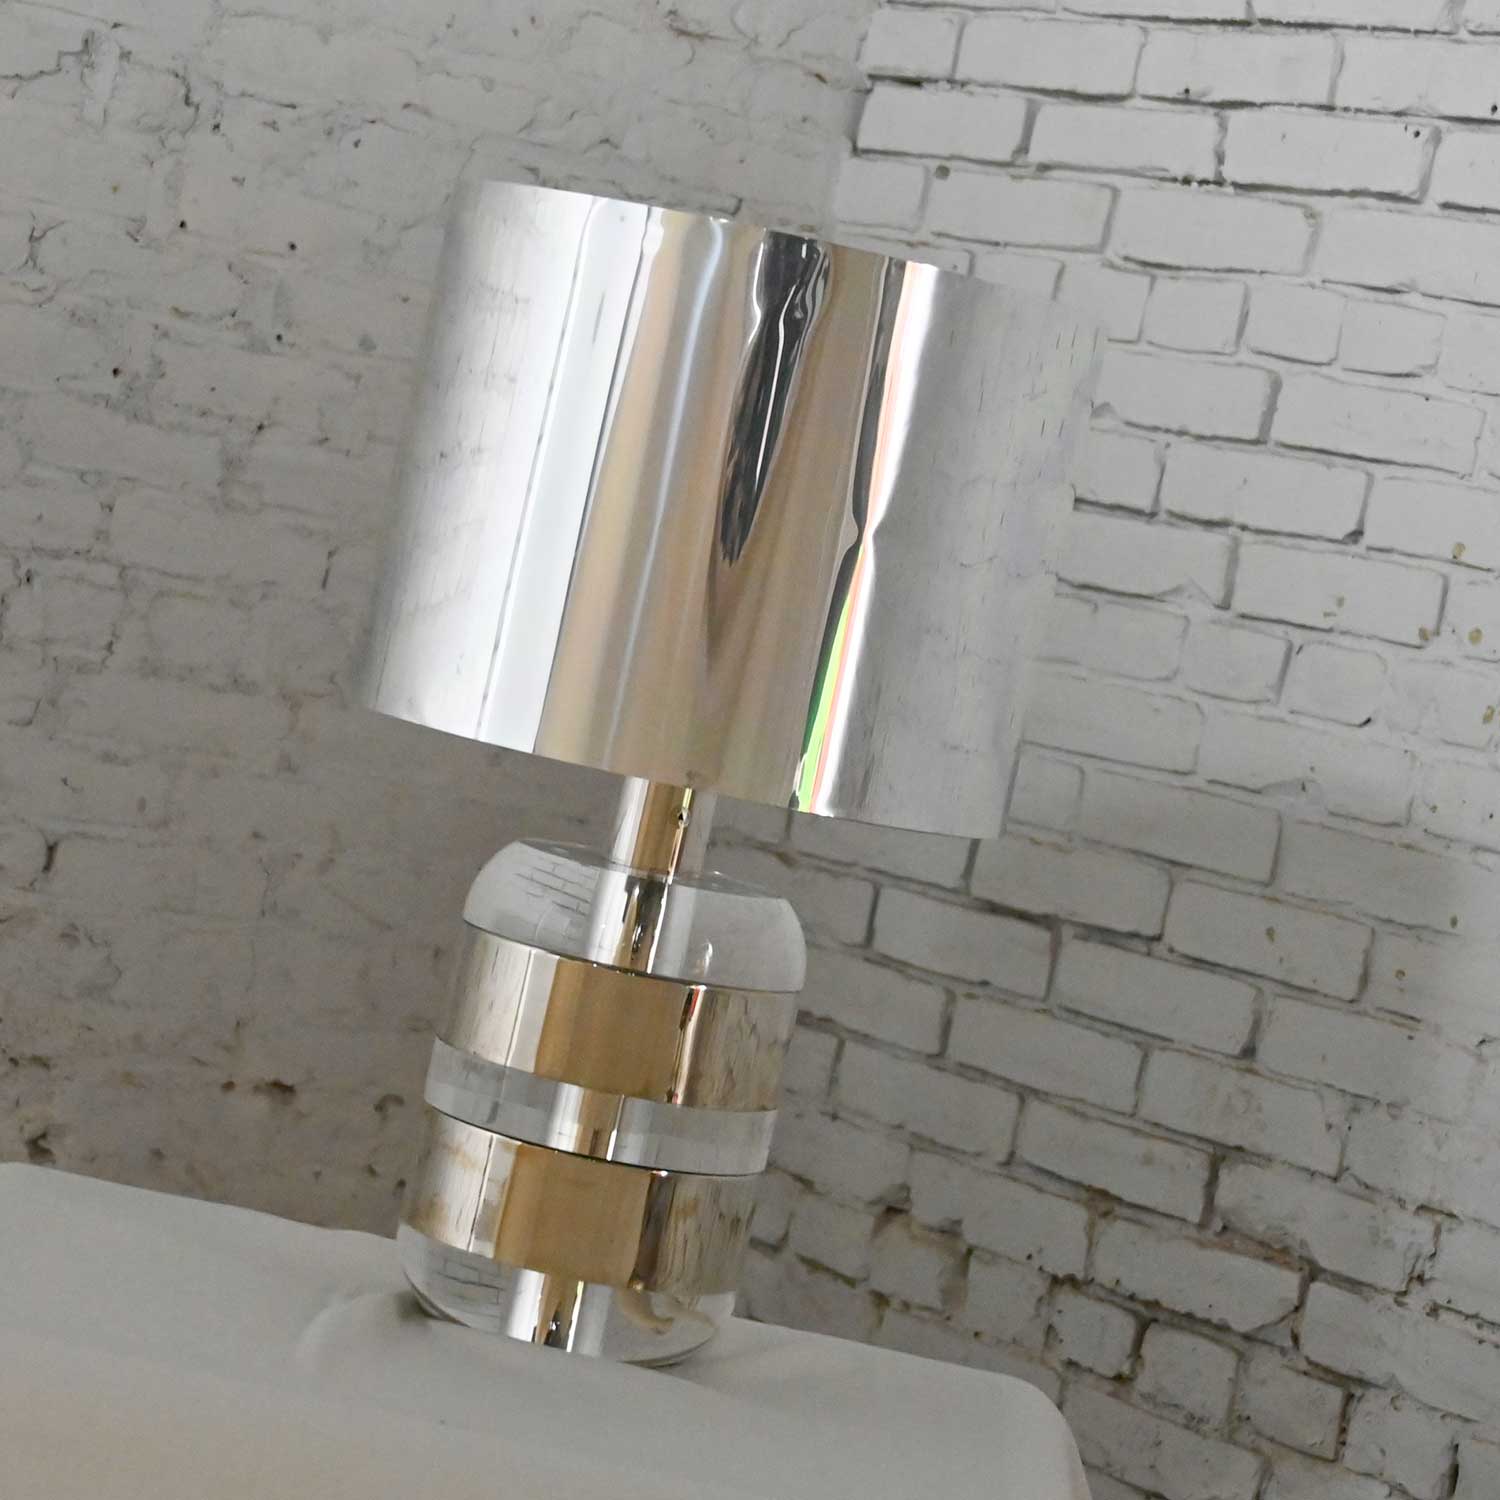 Vintage Italian Modern Lucite & Chrome Table Lamp Polished Aluminum Shade by Noel B.C. Italy